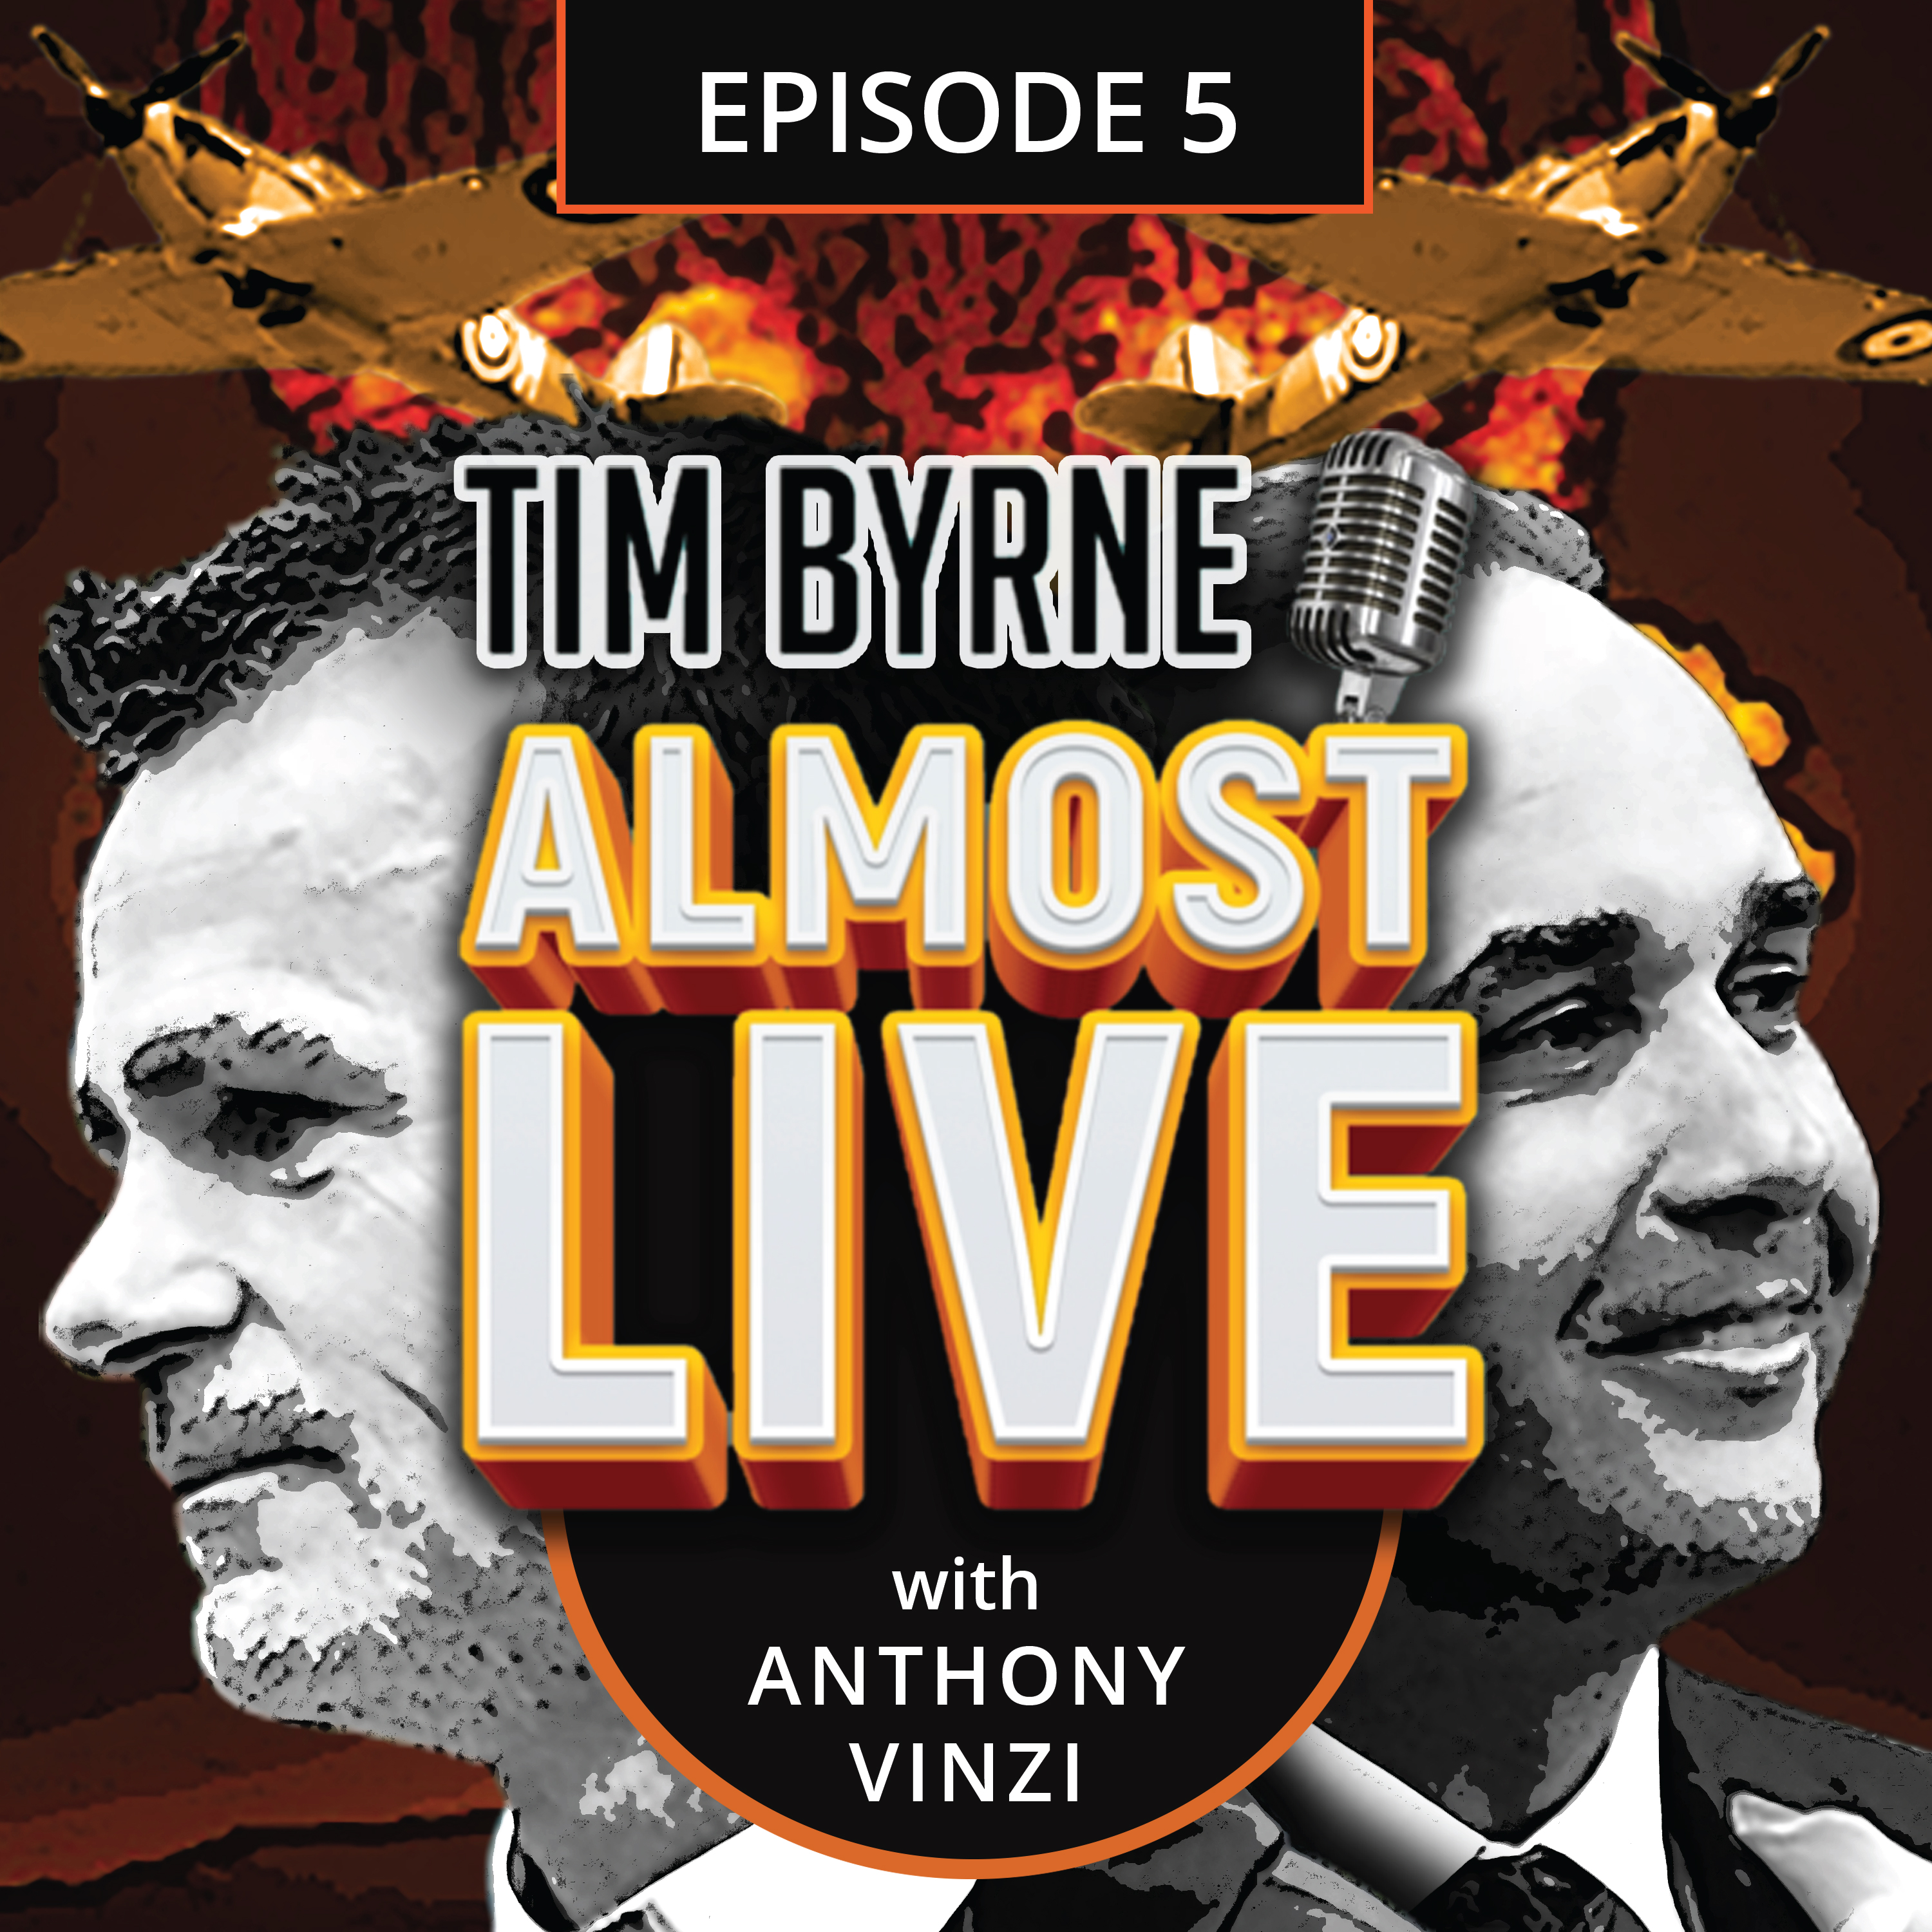 Episode 5 – How to ruin your life in 3 easy steps with Anthony Vinzi